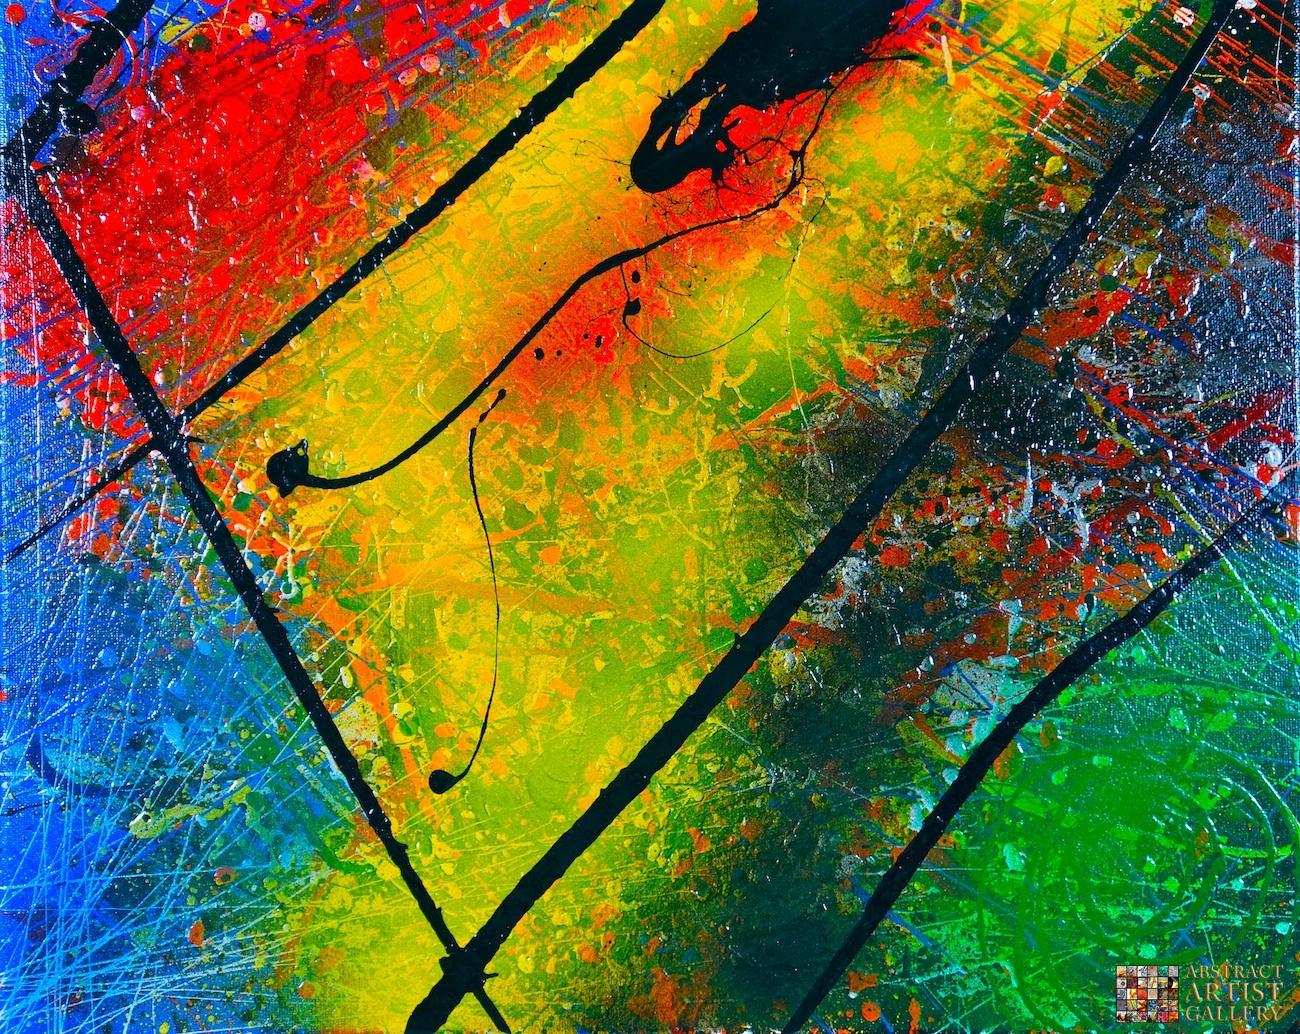 15 Choices abstract art painting You Can Save It Free - ArtXPaint Wallpaper